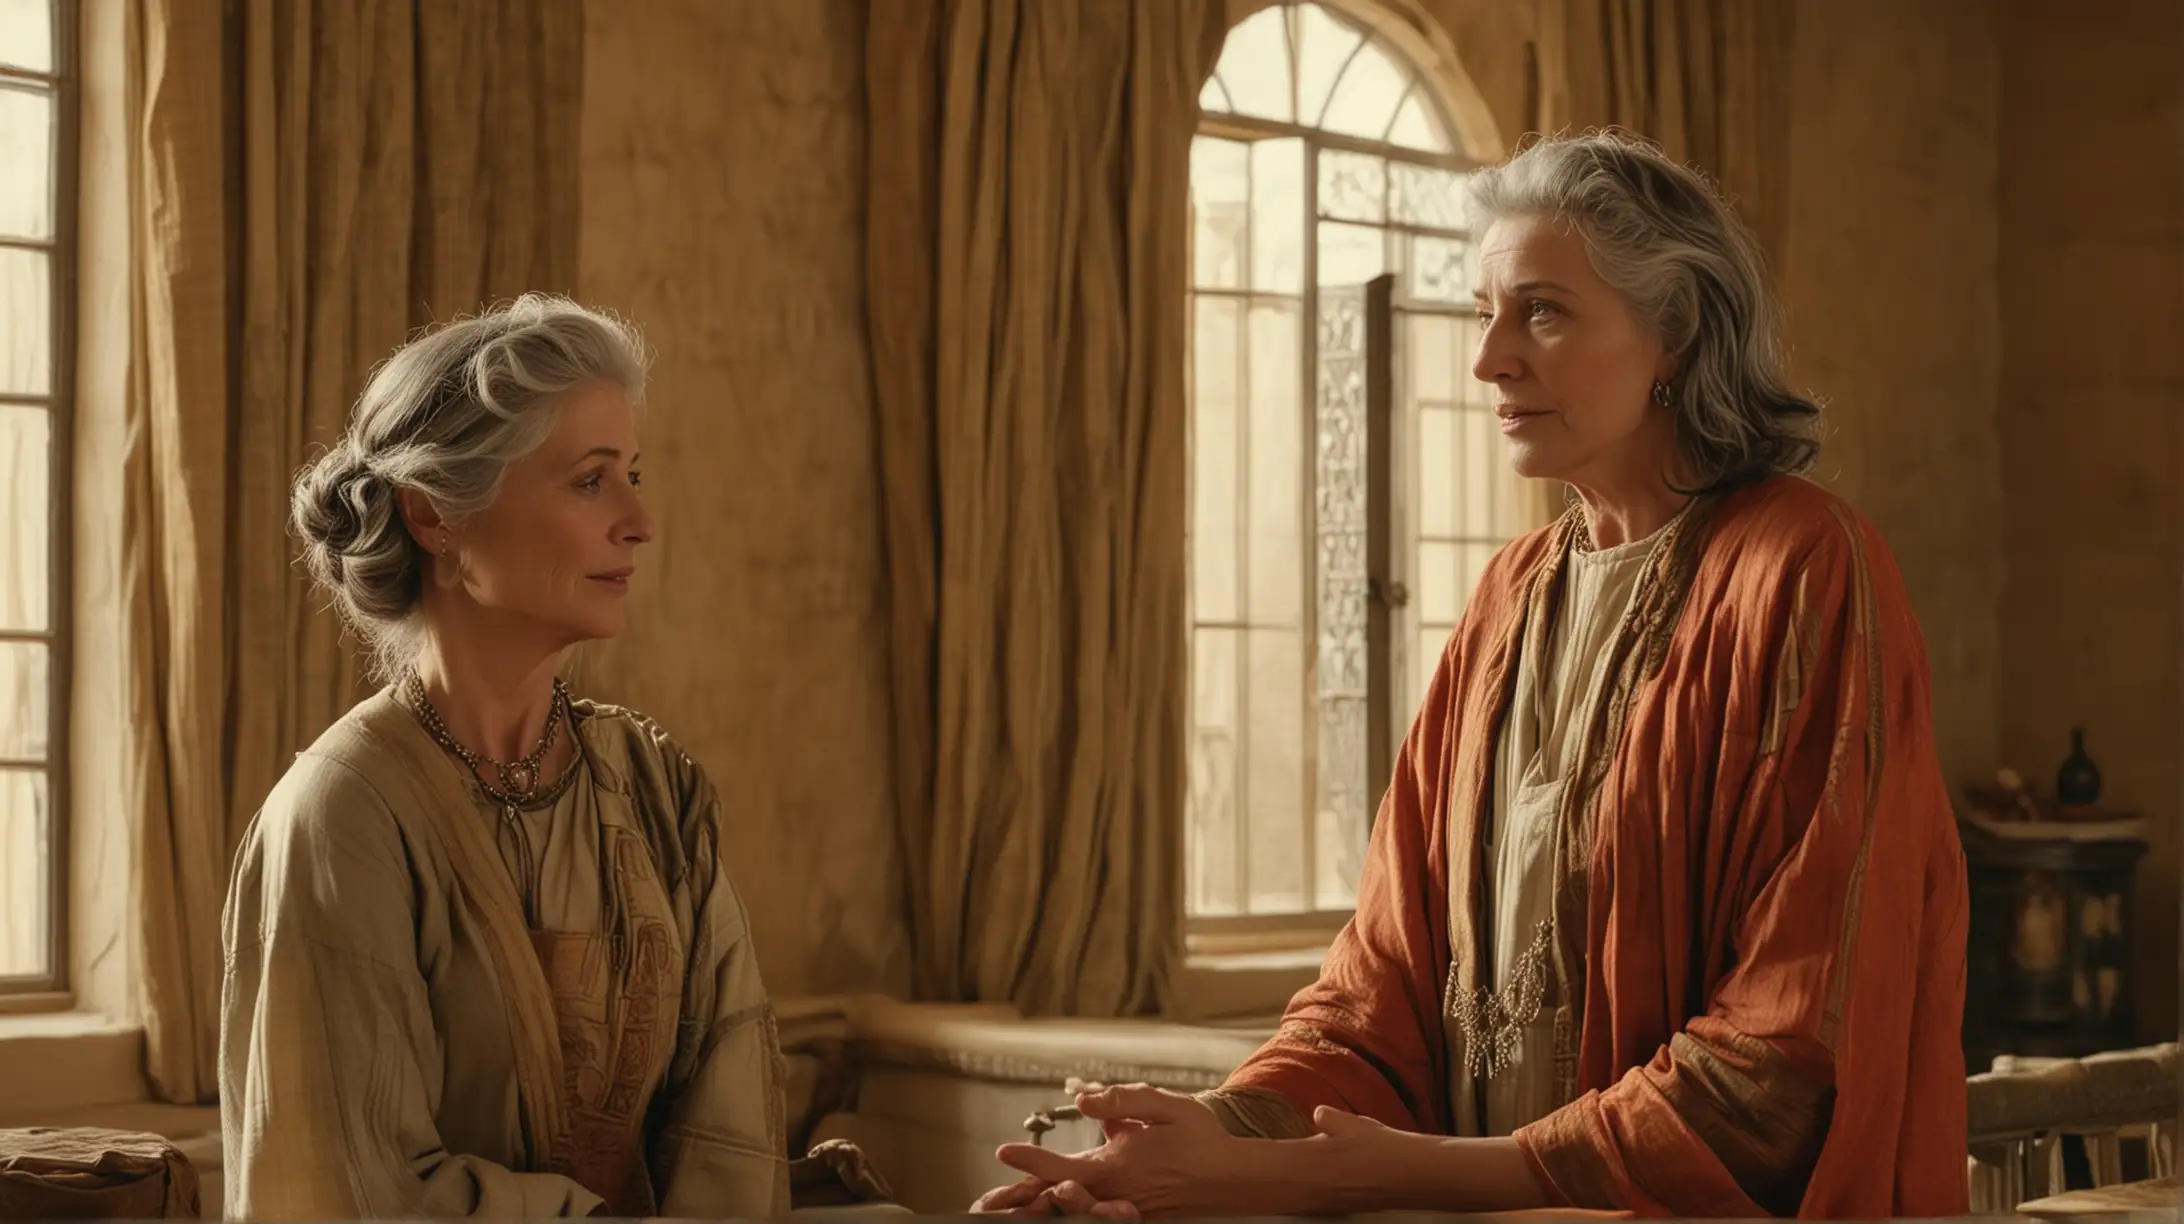 an attractive middle aged grey haired woman speaks to a 50 year handsome man in a desert Palace room near a window. Set during the biblical era of King David.